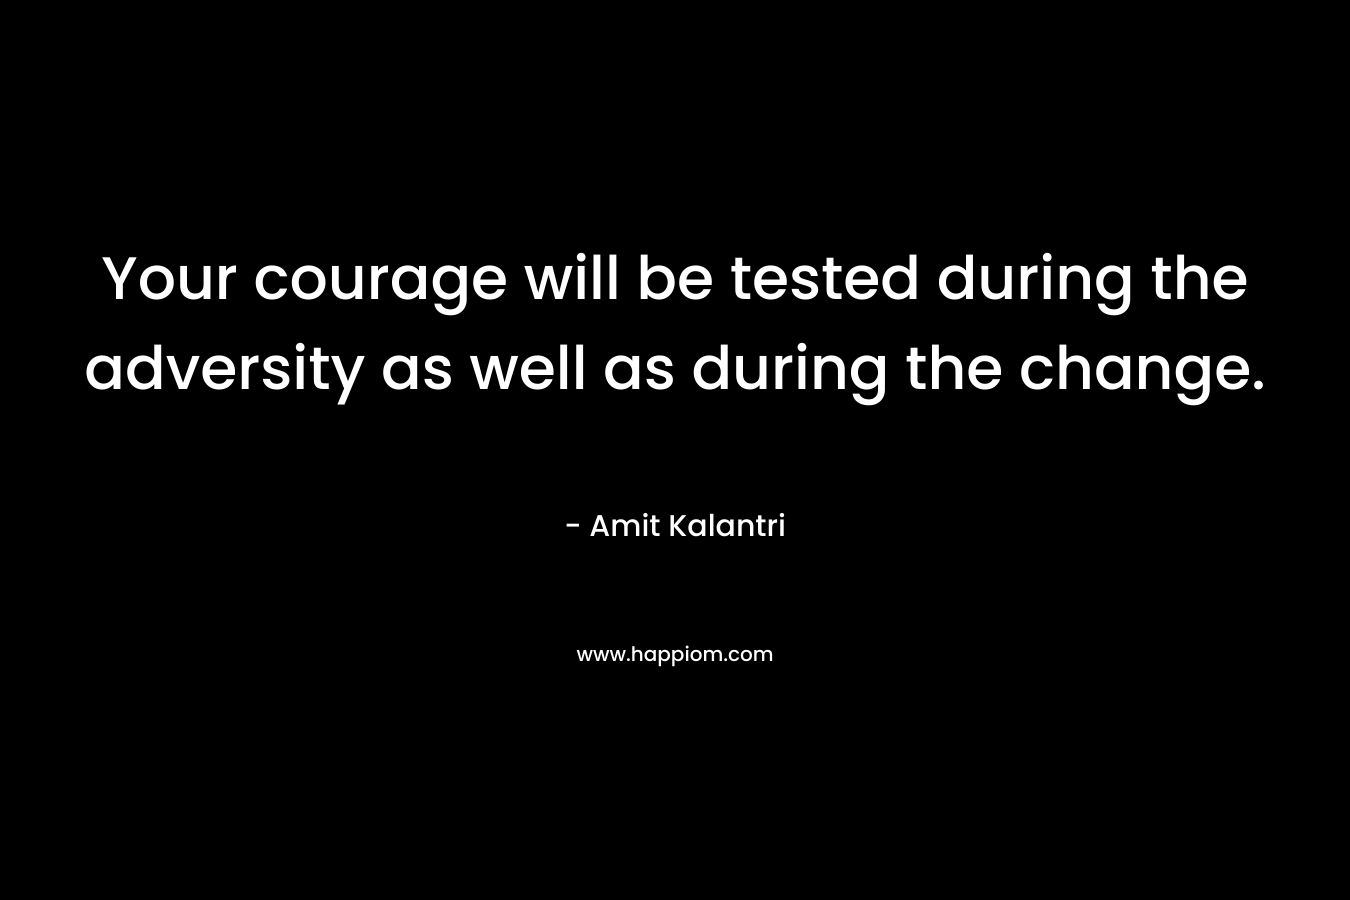 Your courage will be tested during the adversity as well as during the change. – Amit Kalantri